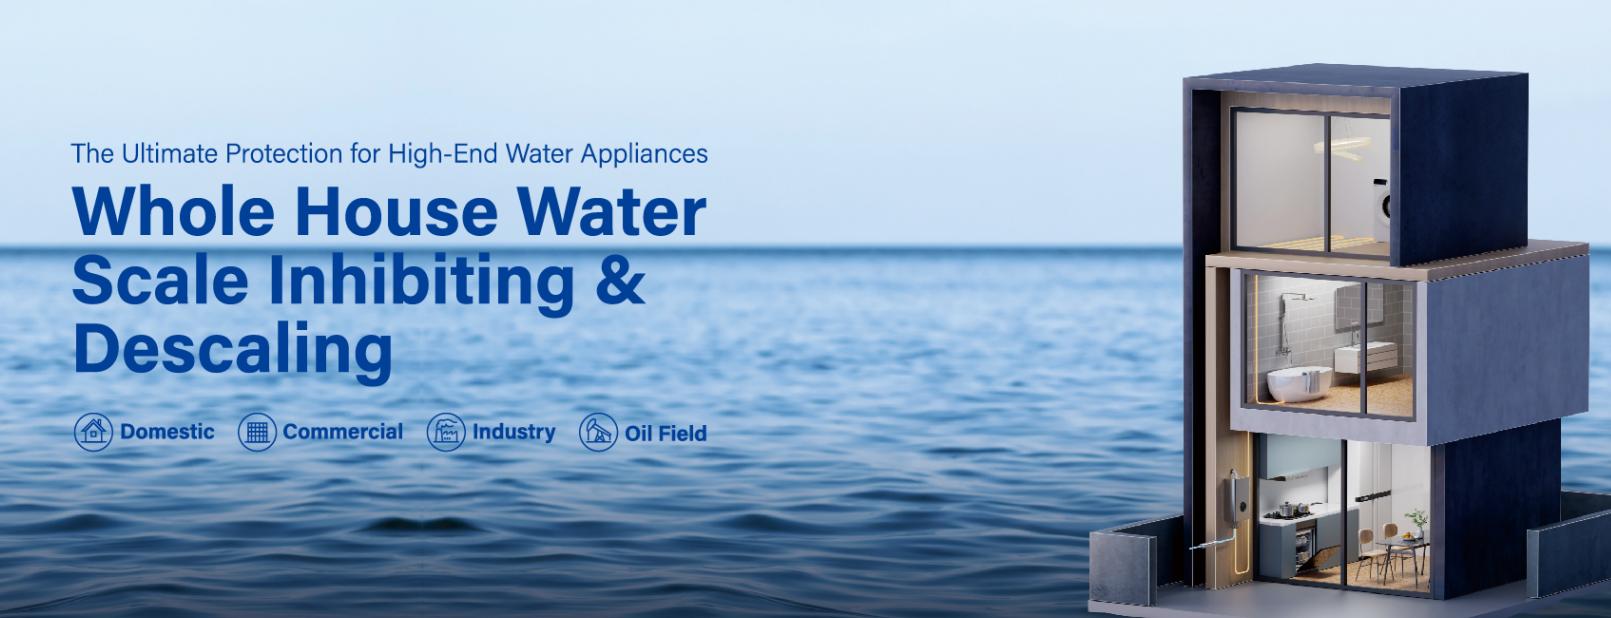 Water Scale Inhibiting&Descaling